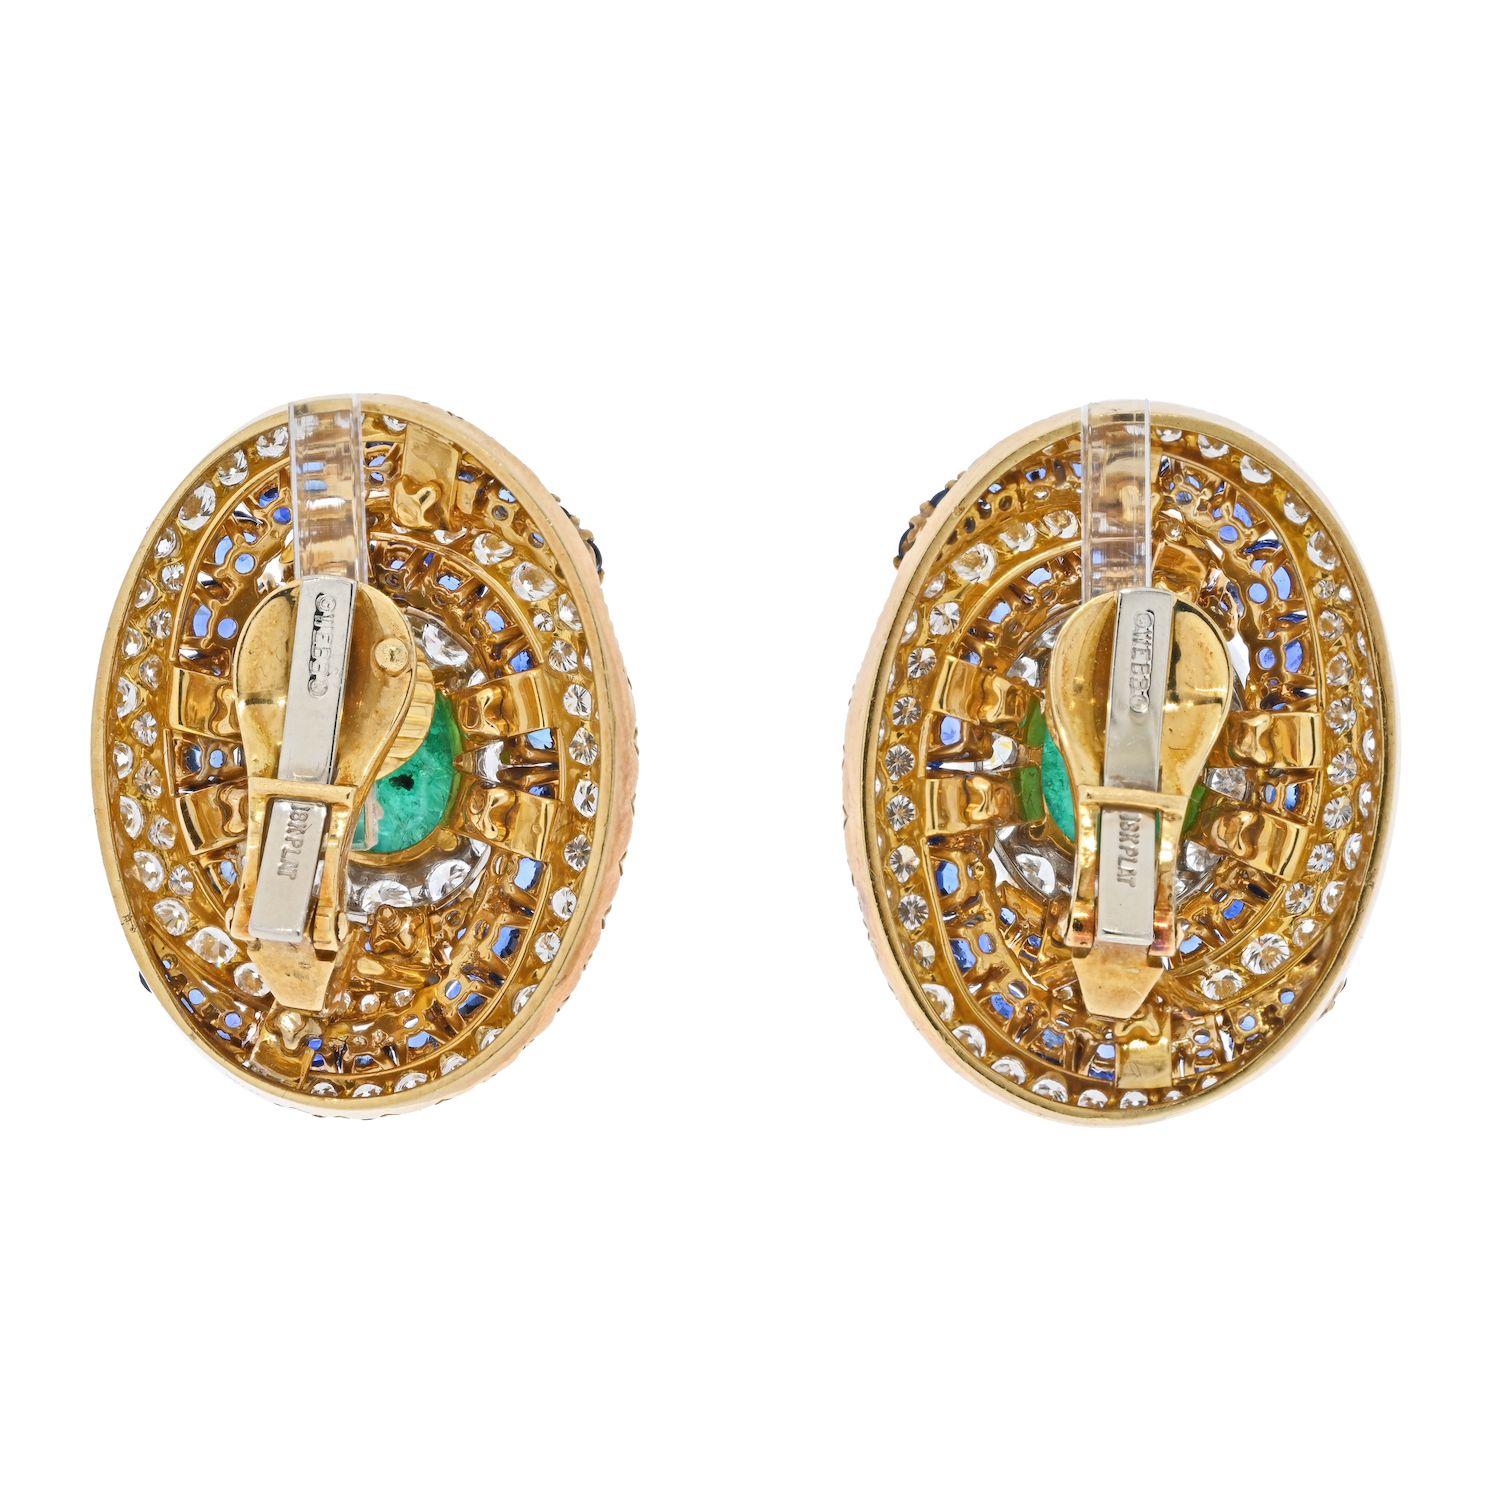 Oval Cut David Webb Bombe Style Highly Decorated Diamond, Sapphire and Emerald Earrings For Sale